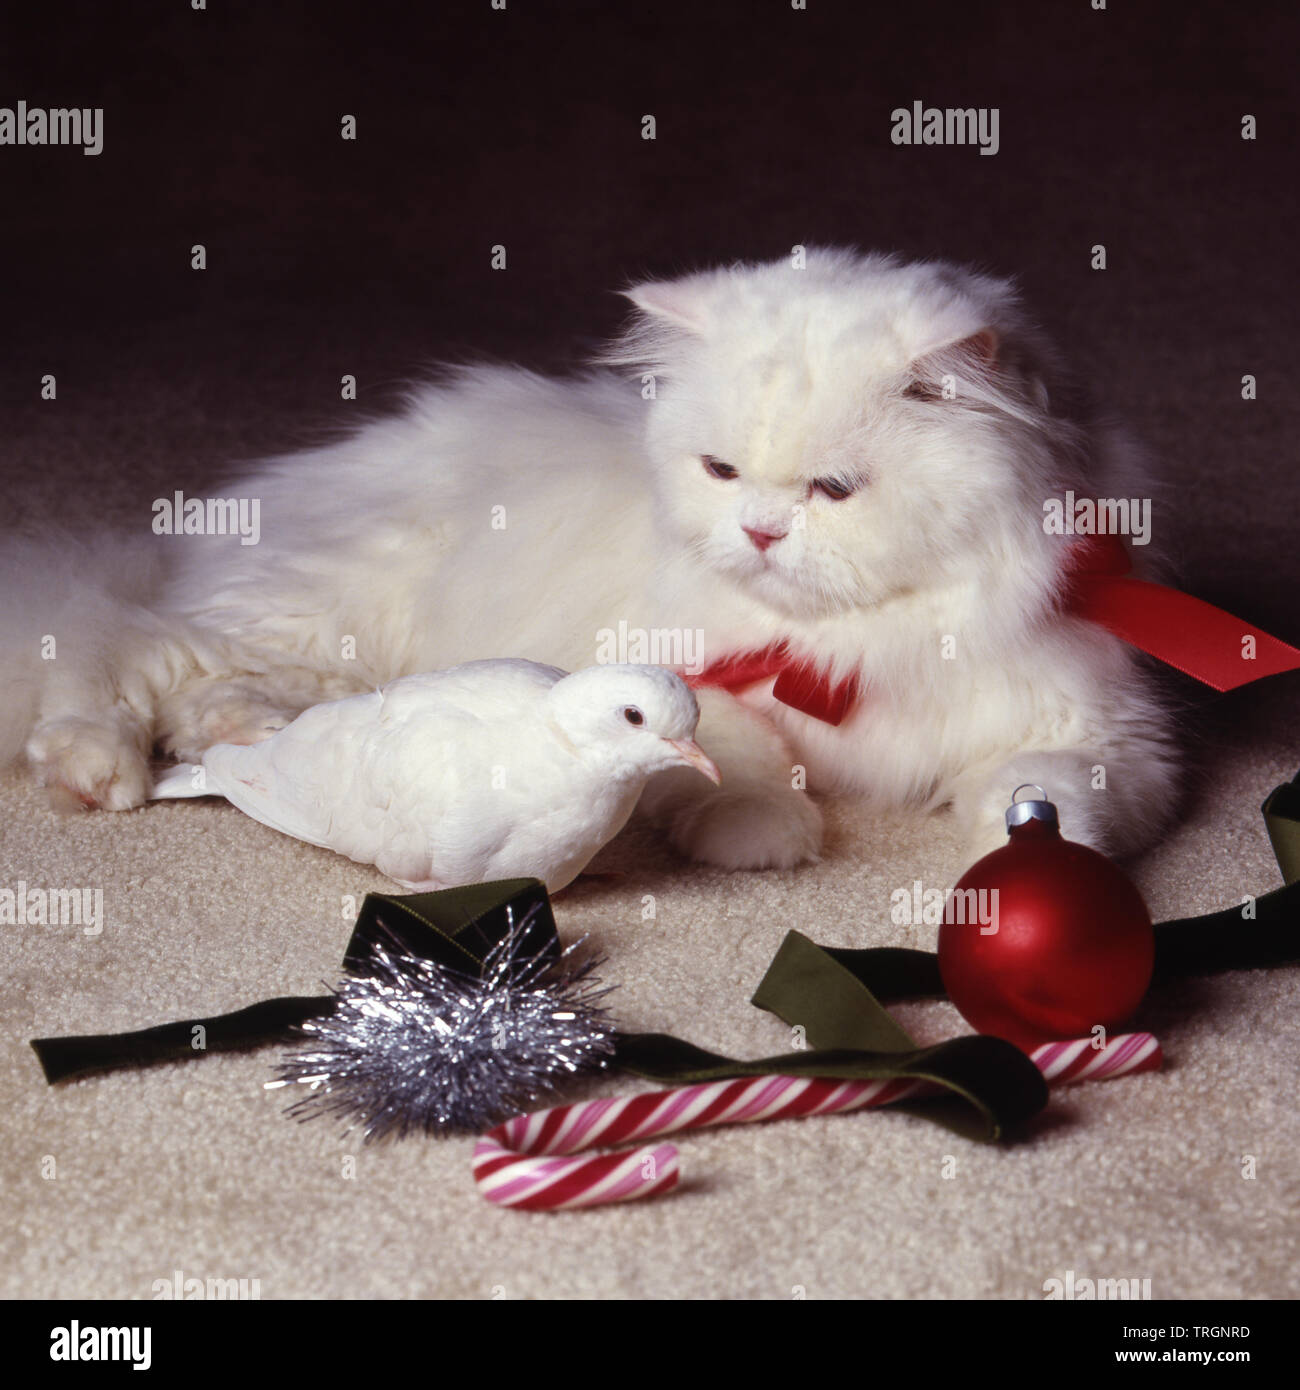 White cat and white dove together with Christmas props Stock Photo